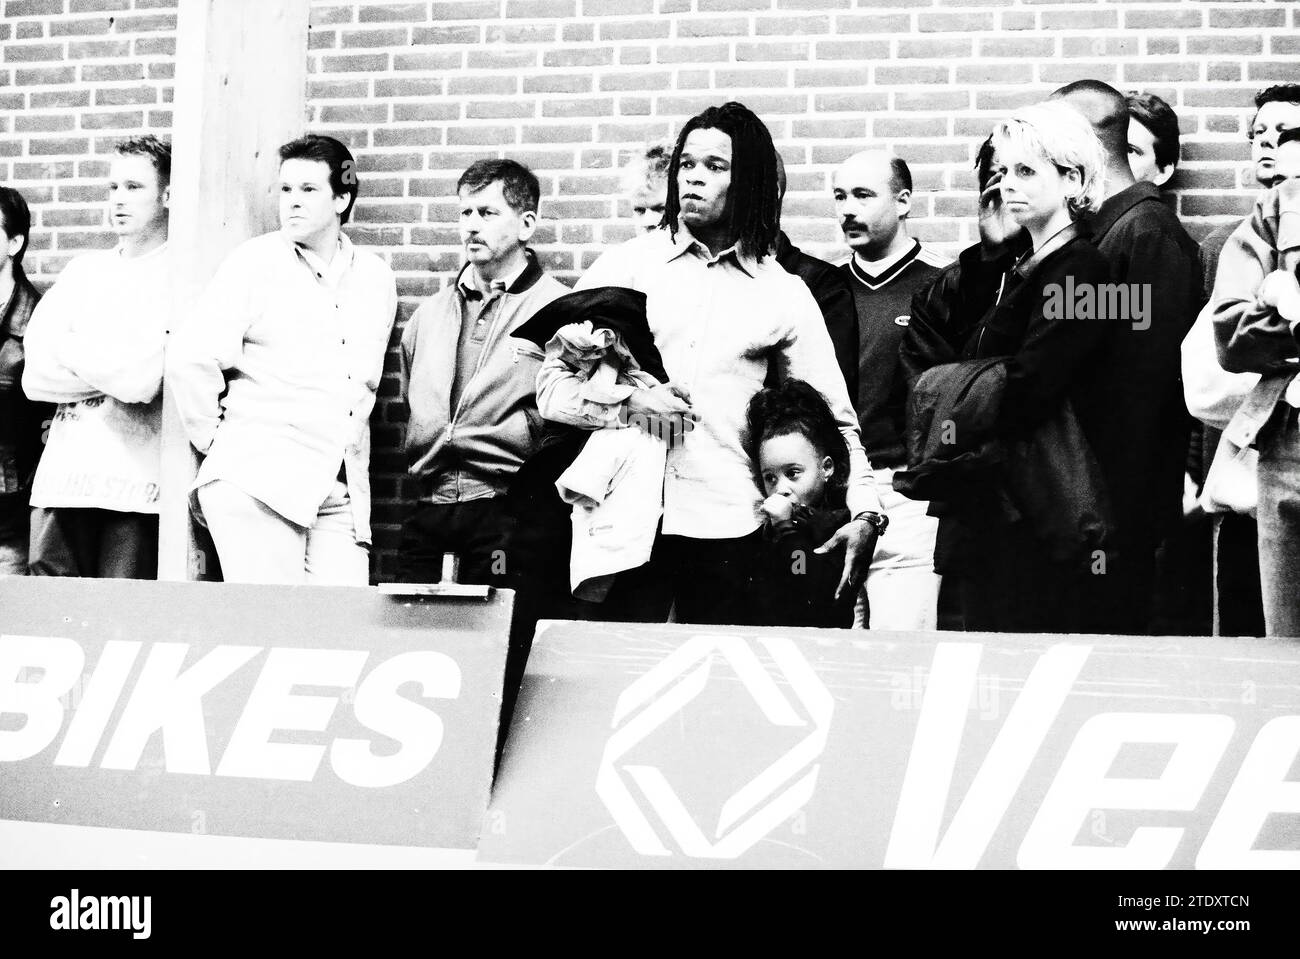 Indoor Football Championship 1998. Kanjers Bunga Melati Tilburg - Hindstore guest: Edgar Davids, 00-00-1998, Whizgle News from the Past, Tailored for the Future. Explore historical narratives, Dutch The Netherlands agency image with a modern perspective, bridging the gap between yesterday's events and tomorrow's insights. A timeless journey shaping the stories that shape our future. Stock Photo